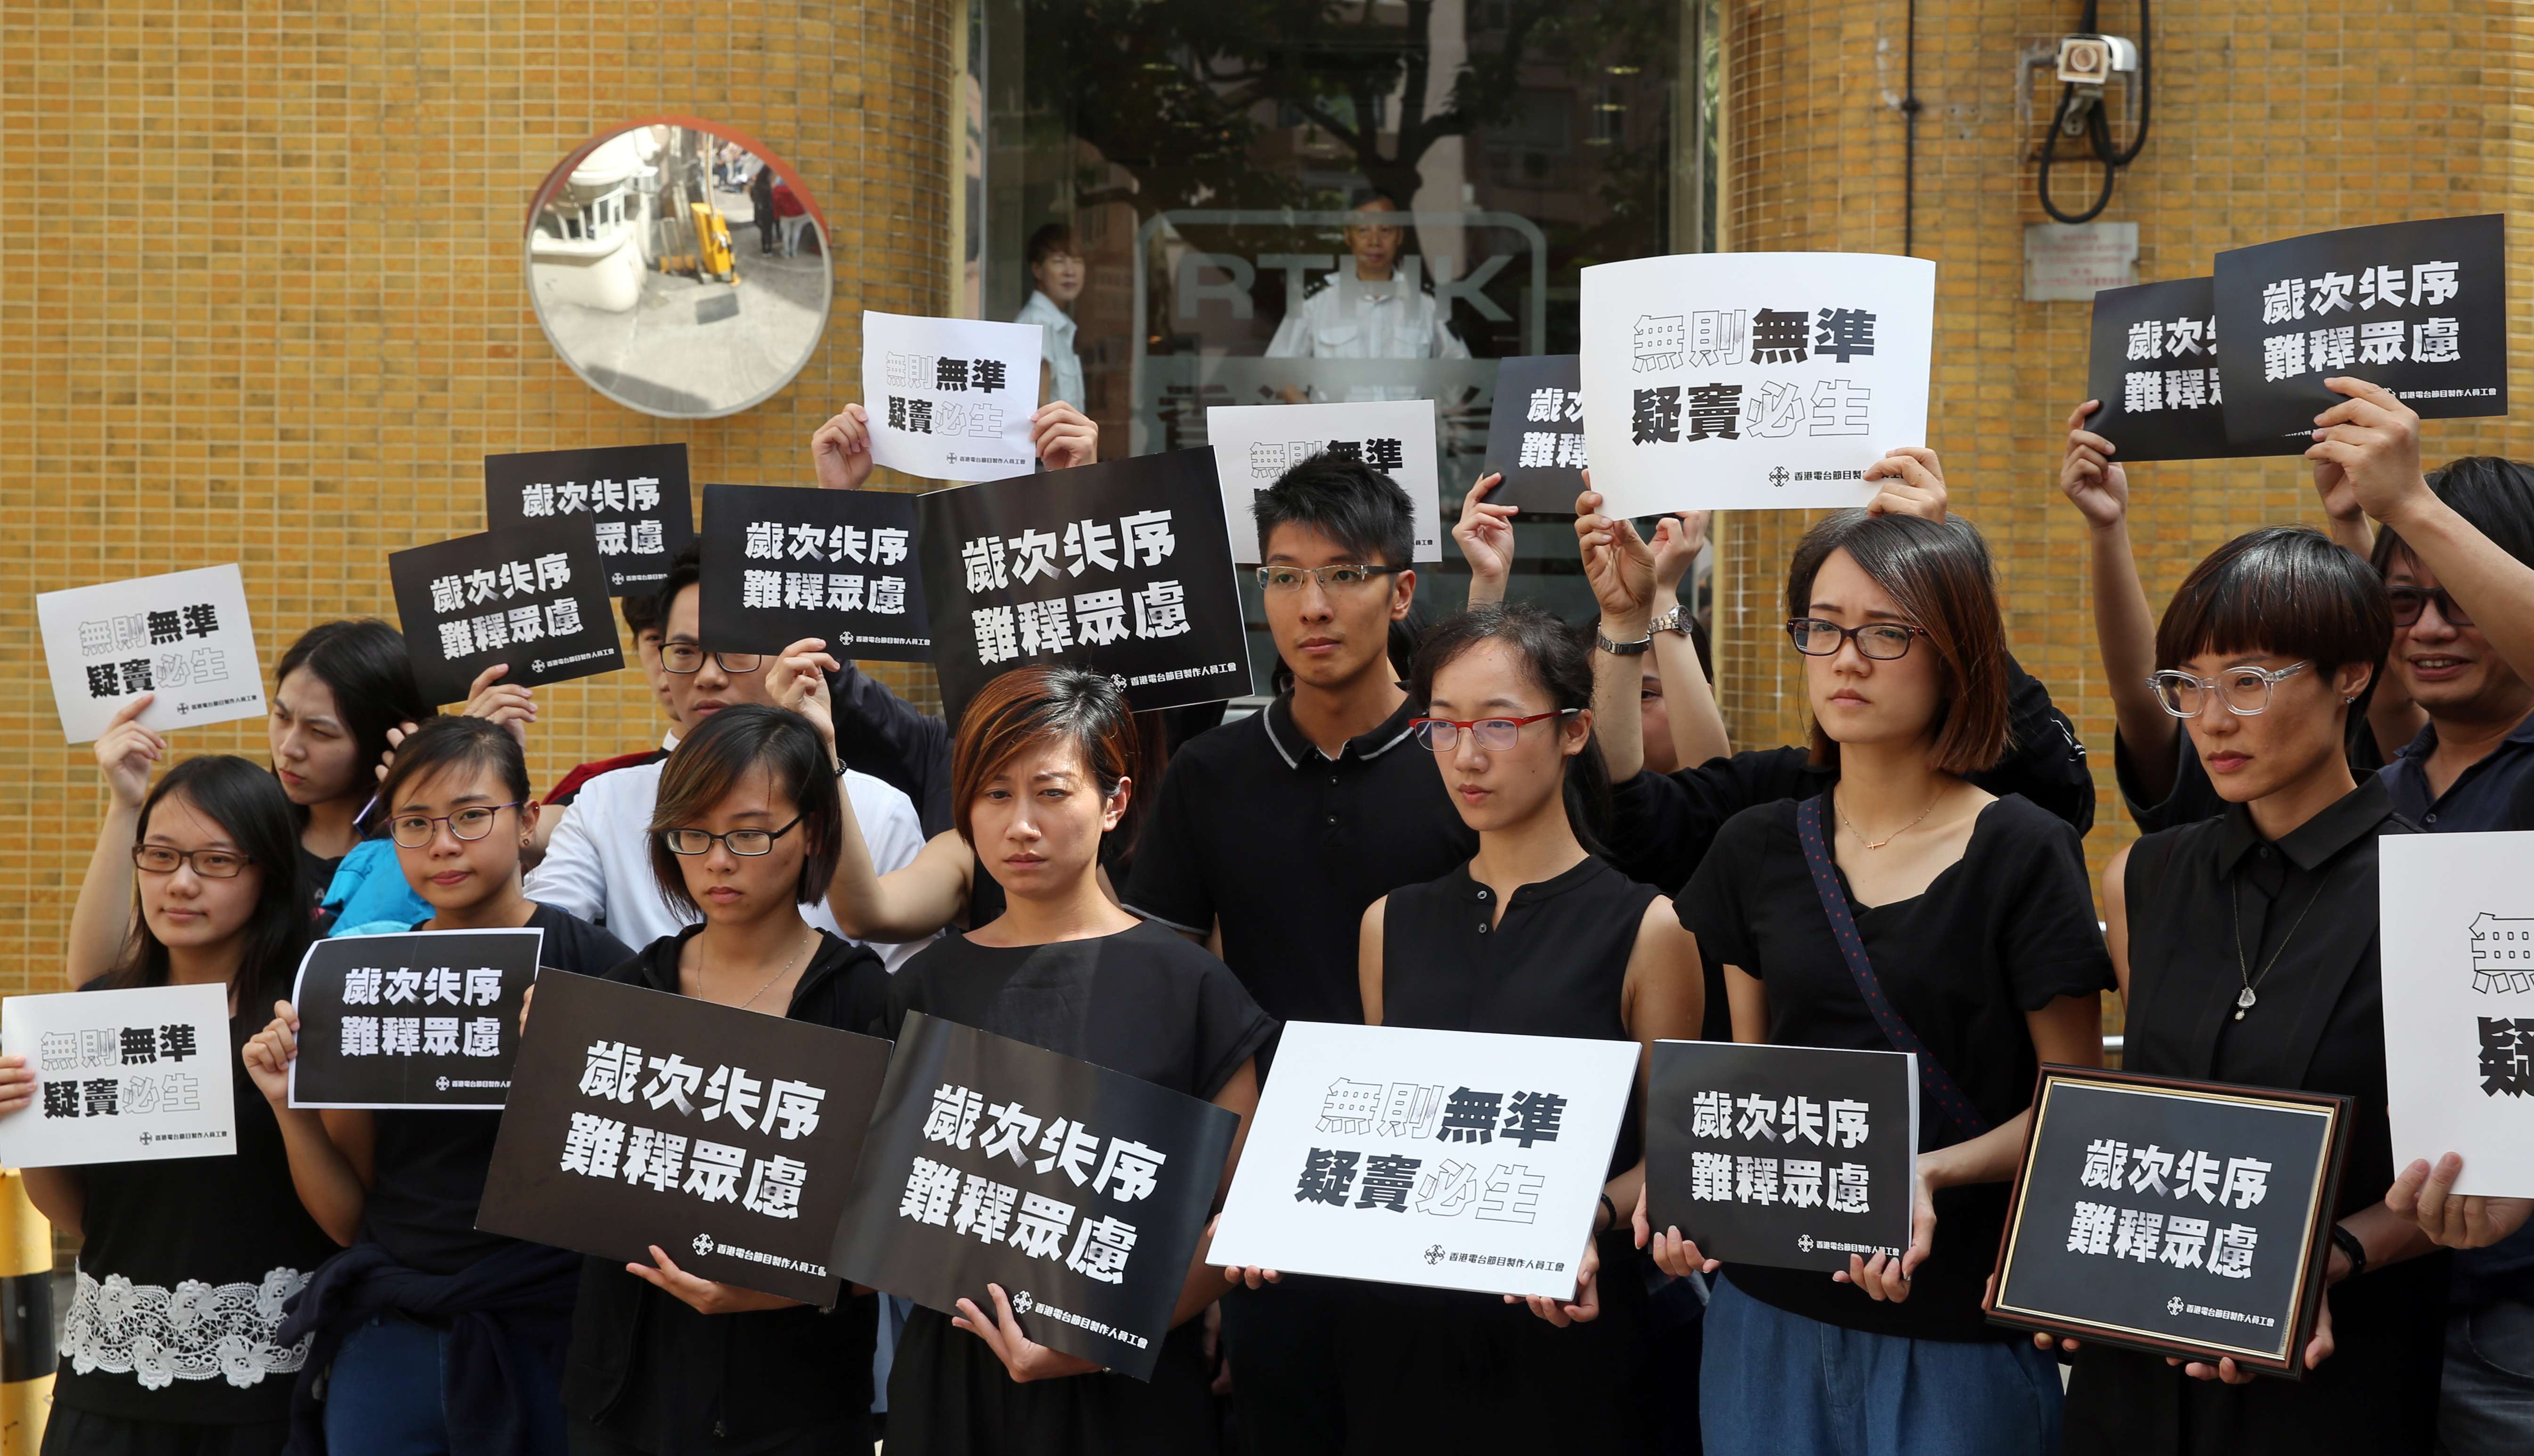 RTHK union members wear black during the protest. Photo: Sam Tsang